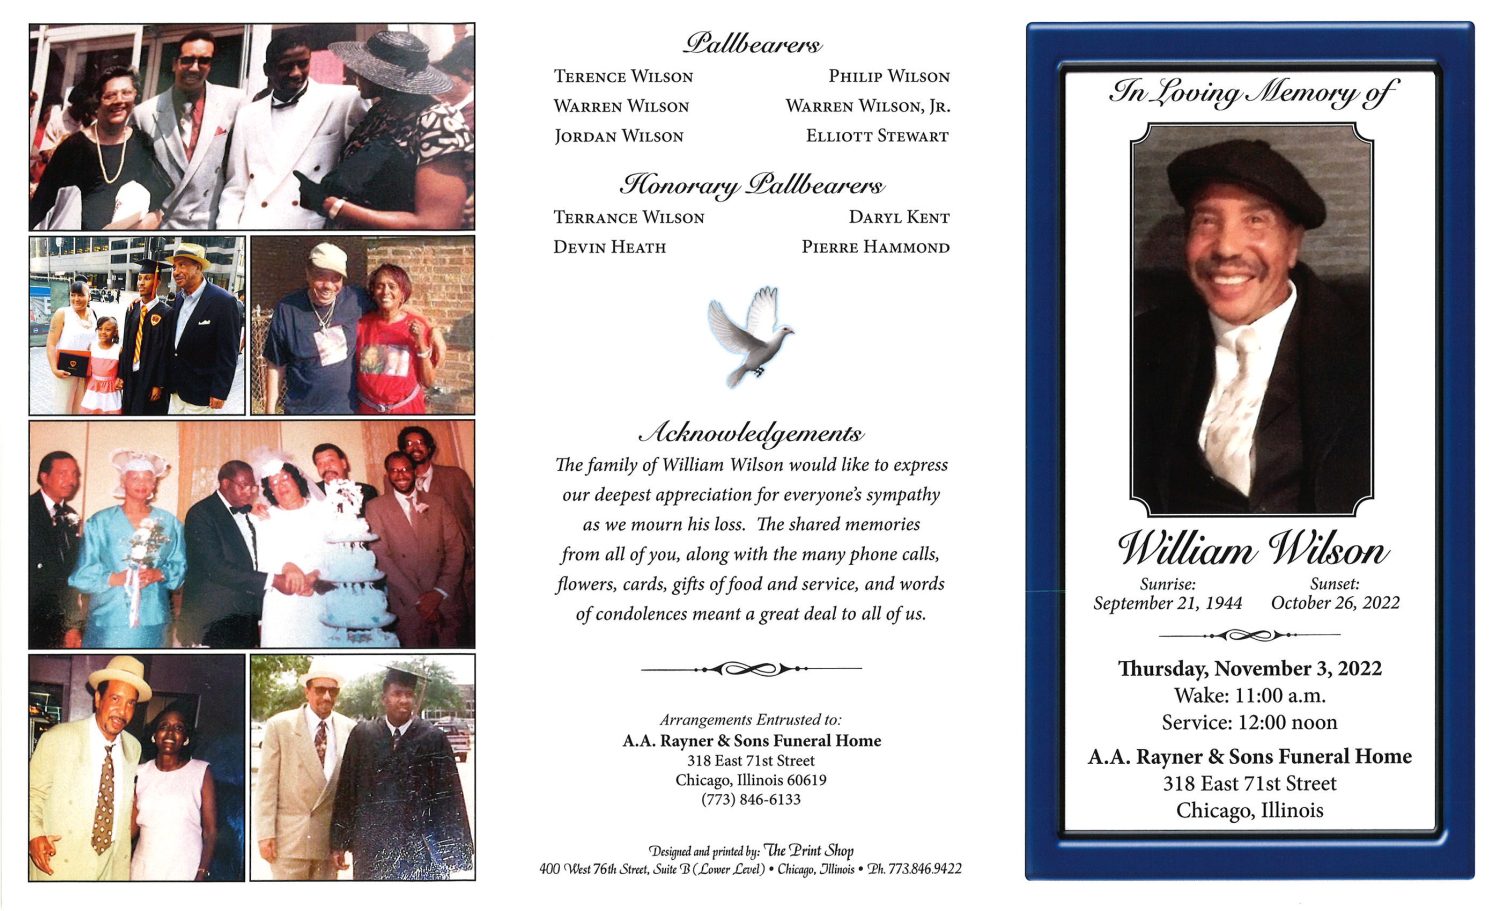 William Wilson Obituary AA Rayner and Sons Funeral Homes